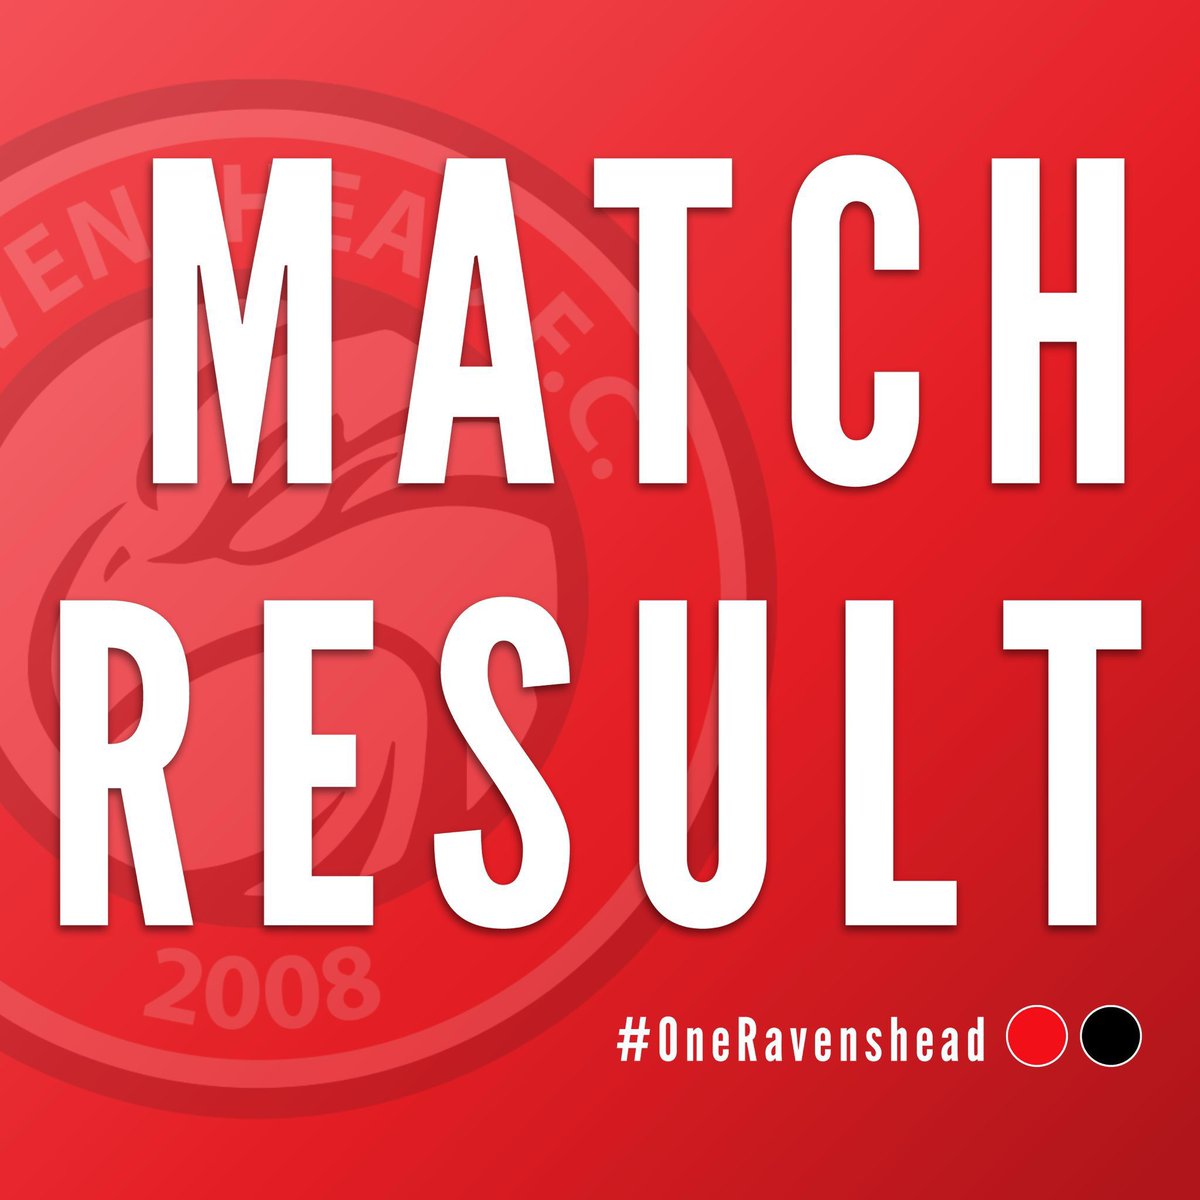 FULL TIME The Vets produced a dominating performance (8-0) over Long Bennington FC this afternoon at the Cornwater. ⚽️⚽️ D Voller ⚽️⚽️ L Purdey ⚽️ P Smith ⚽️ J Fisher ⚽️ M Yates ⚽️ C Green 🅰️🅰️ M Bradbury 🅰️ C Green 🅰️ P Smith 🅰️ B Gamble 🅰️ J Fisher 🅰️ R Hardwick 🔴⚫️